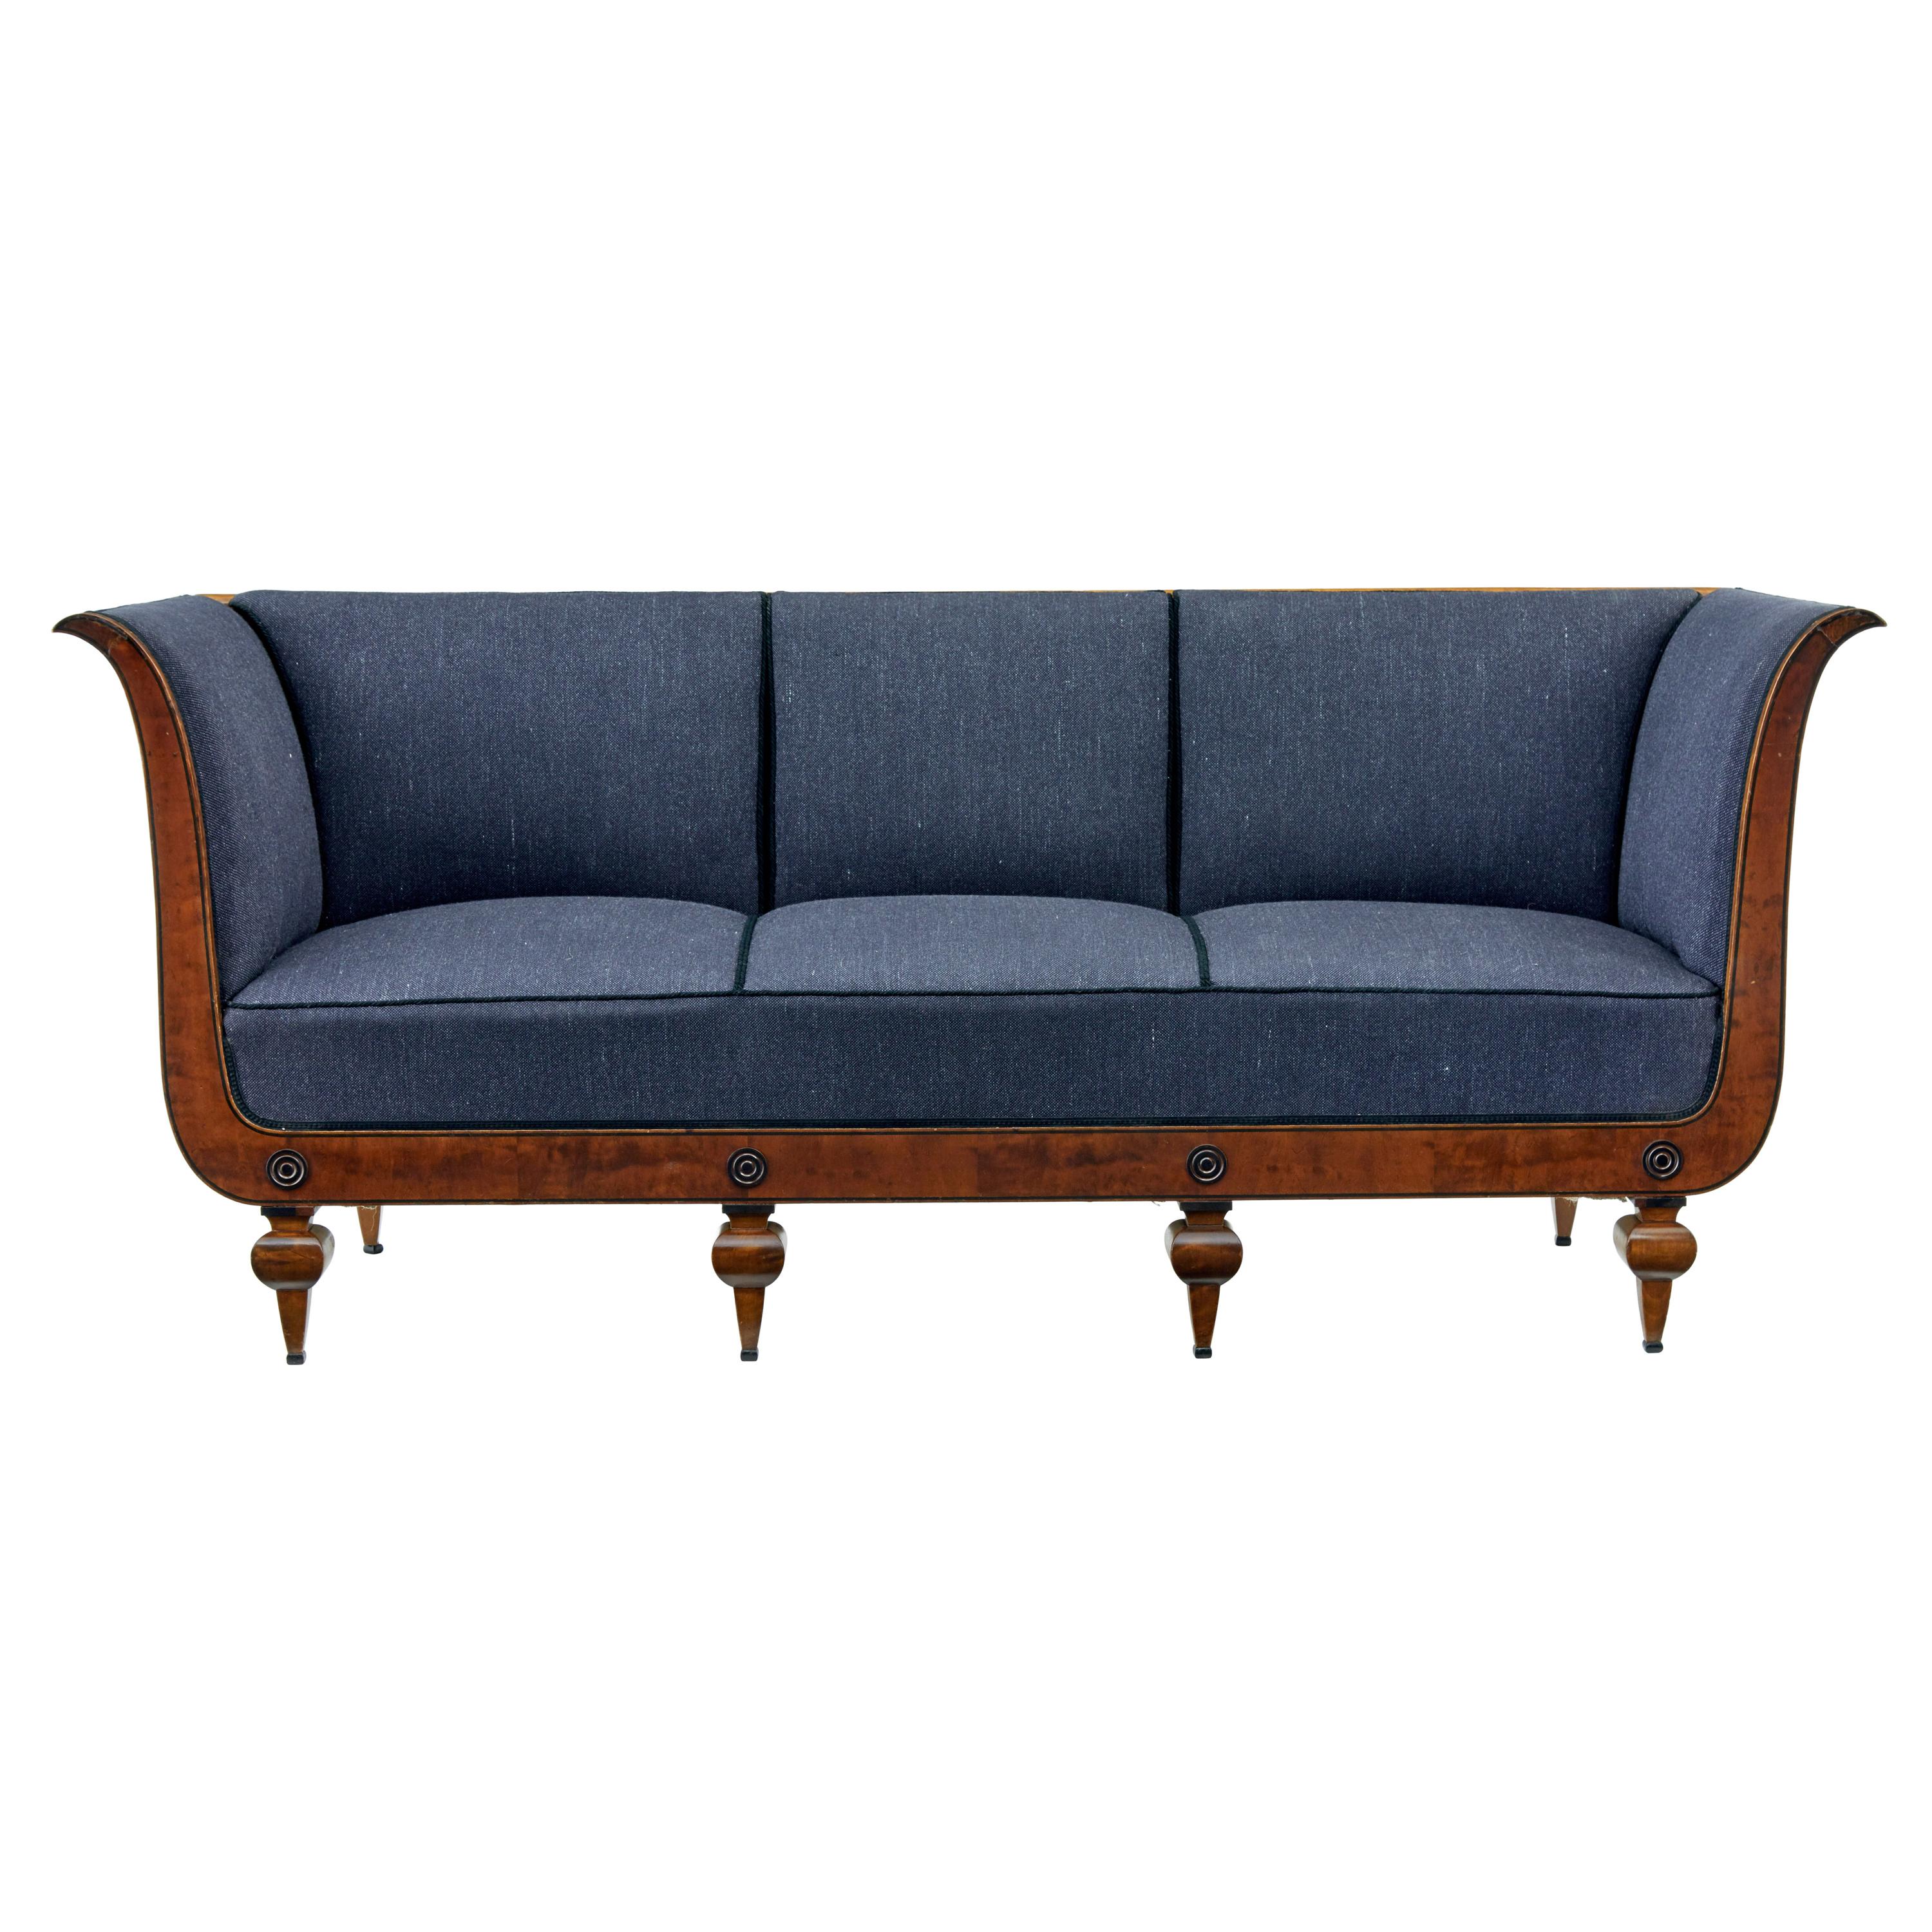 Early 20th Century Birch Sofa Attributed to David Blomberg